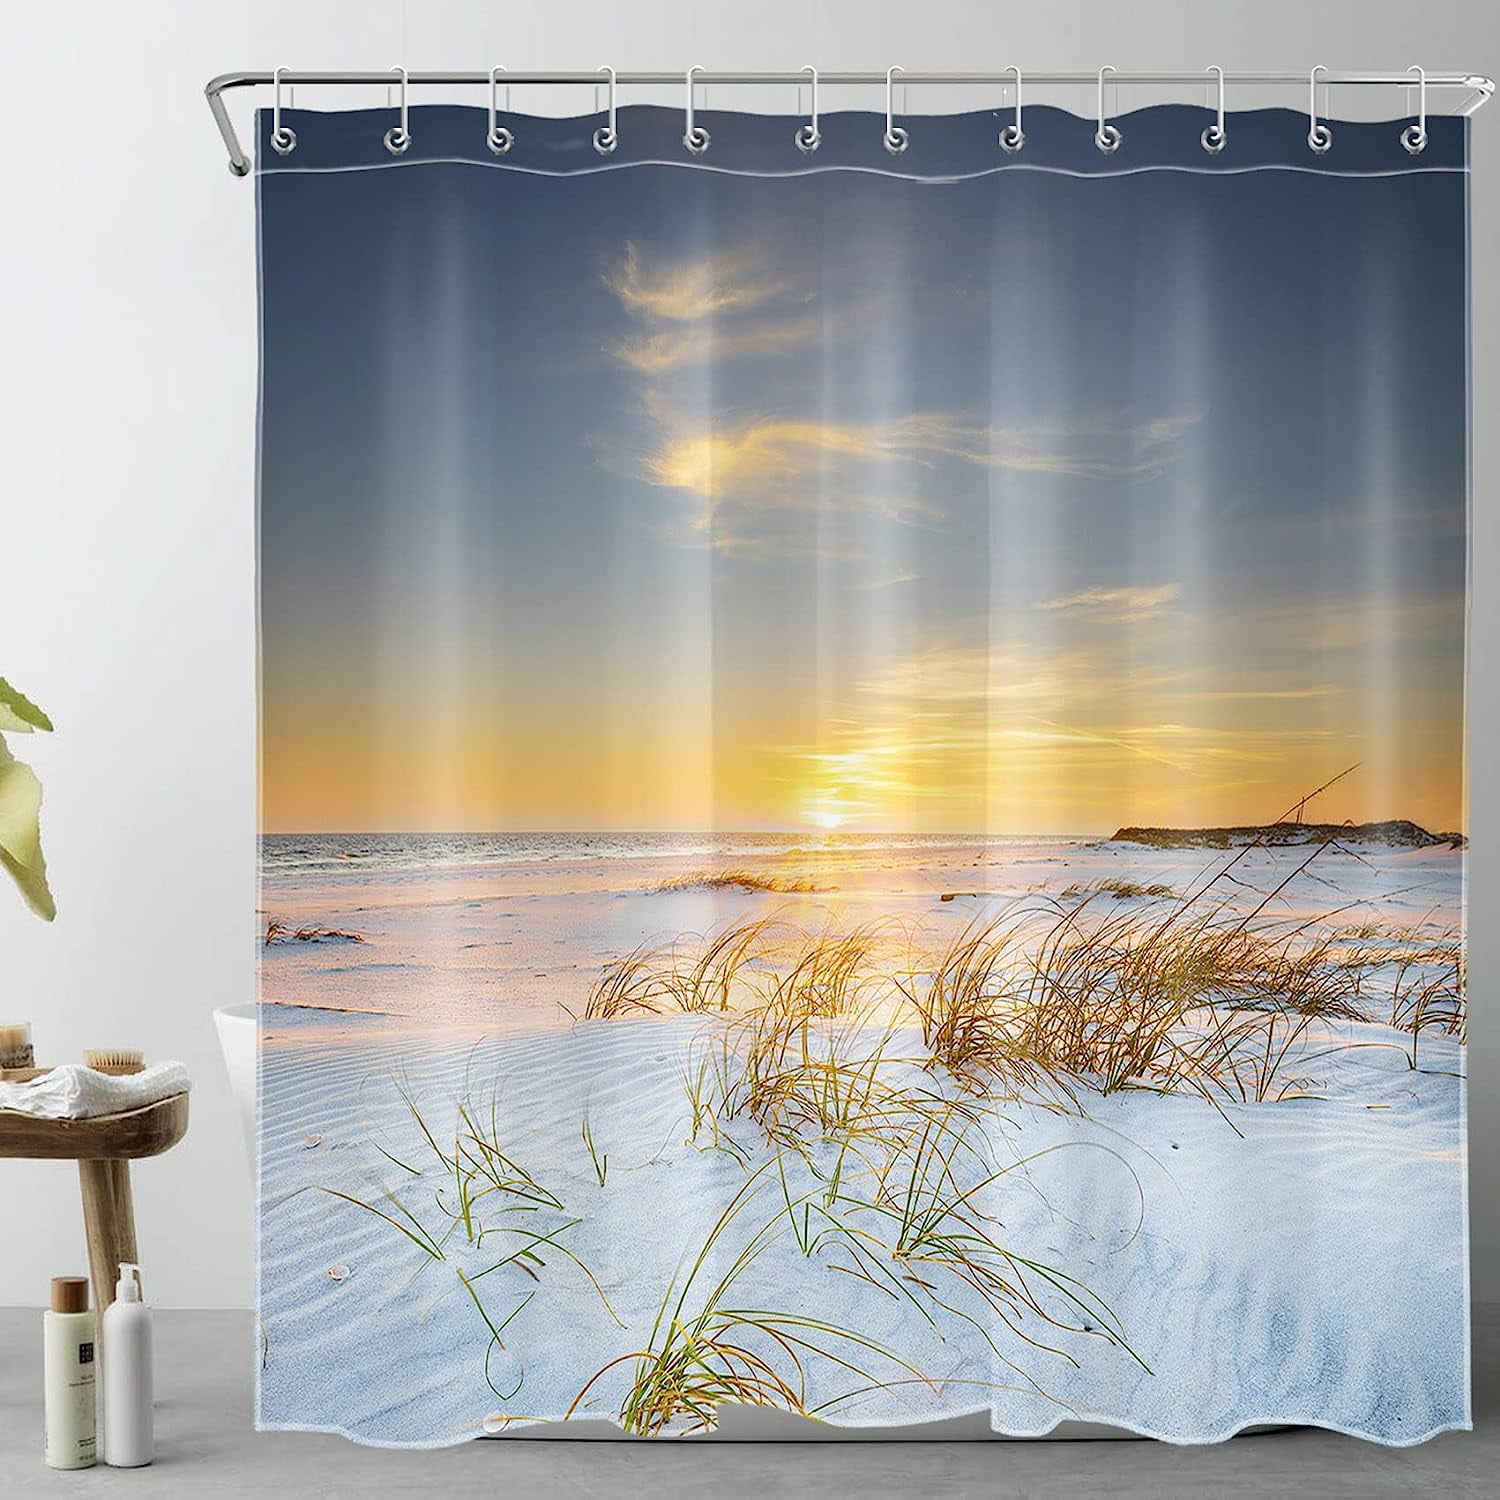 JOOCAR 72x72 Inch Tropical Sunset Landscape Shower Curtains Summer Sea Level  Coconut Tree Blossom Floral Bathtub Decor Cloth Waterproof Machine Washable Shower  Curtain Sets with 12 Hooks 